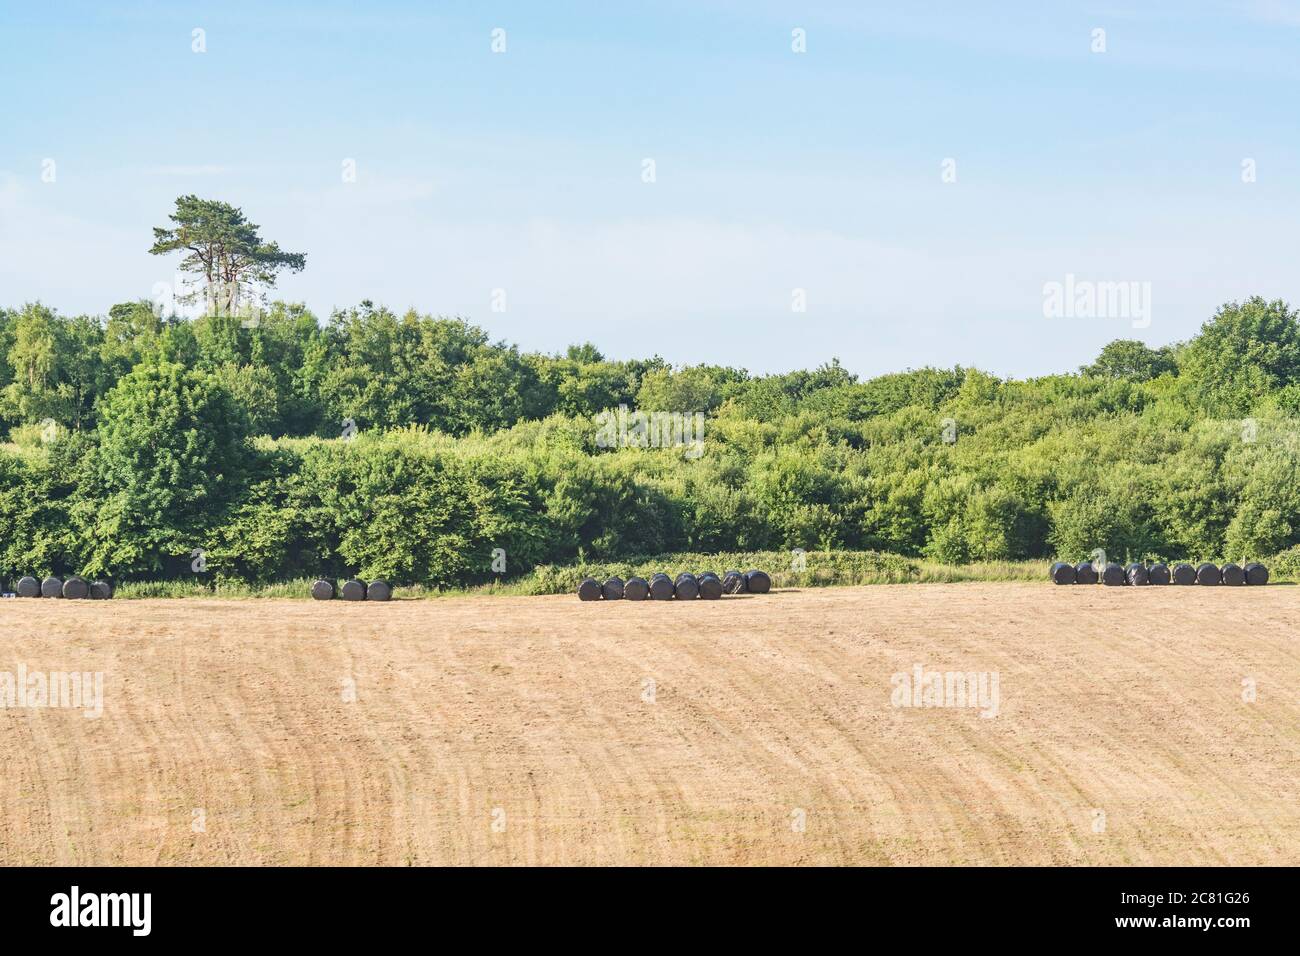 Distant black polywrap wrapped haylage bales in summer sunshine. Metaphor UK farming industry, & also plastic uses, plastics in countryside. Stock Photo